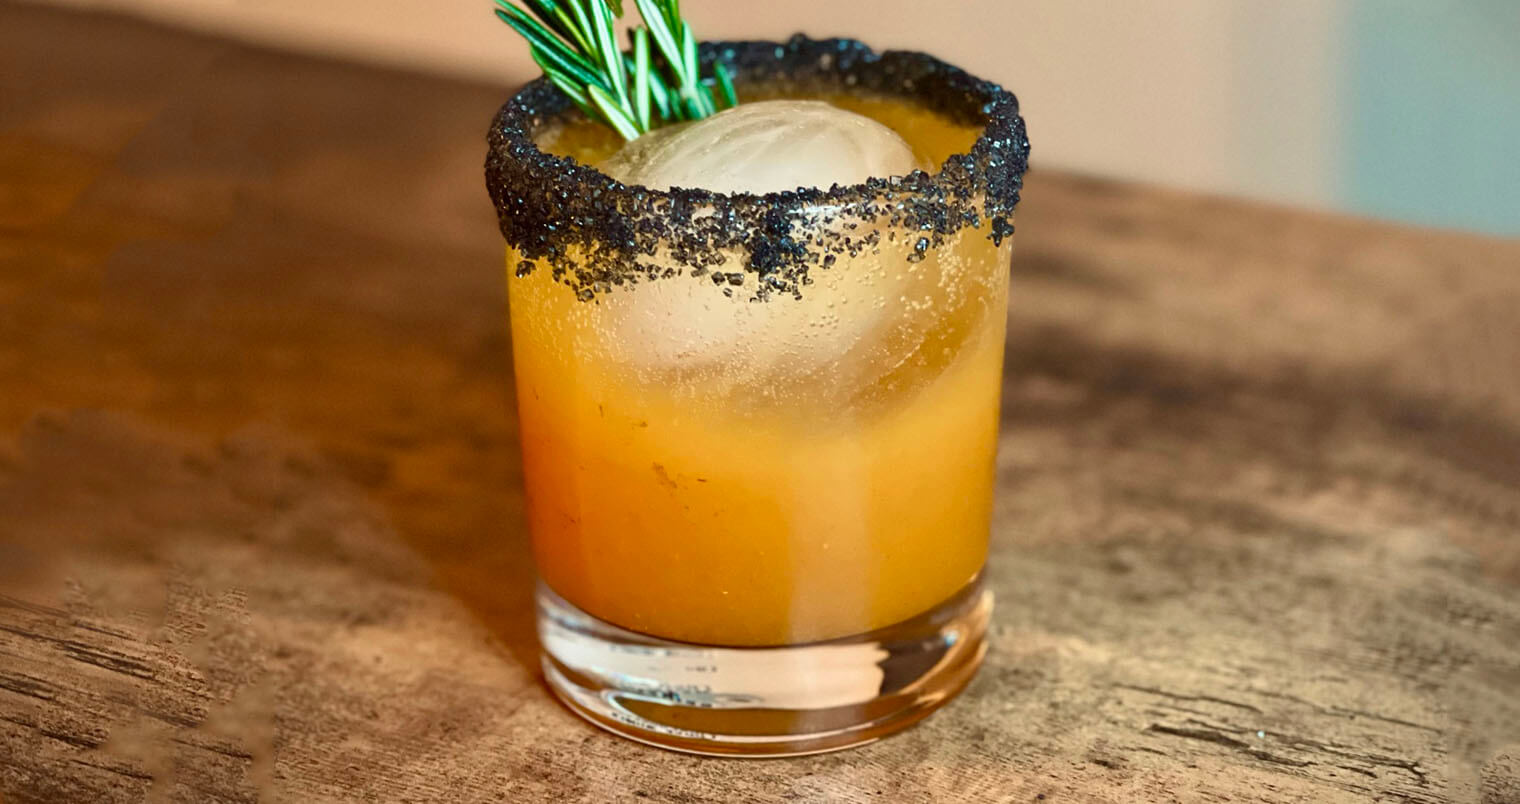 “Goblet of Fire”, cocktail with garnish, featured image